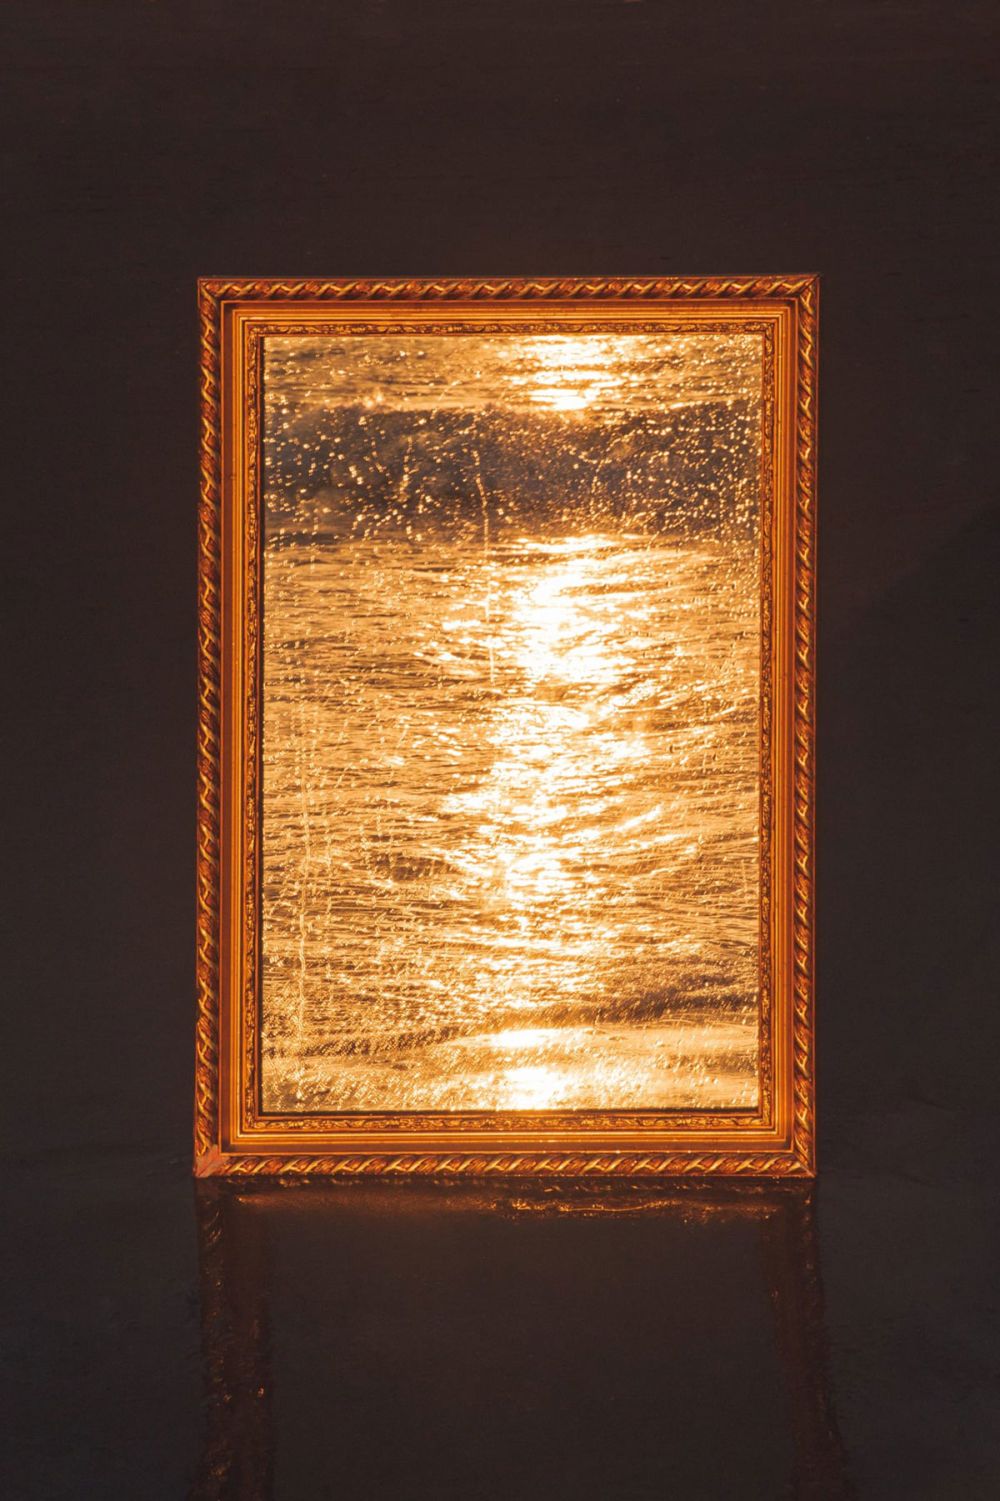 Image depicts a mirror reflecting golden sunlight over water.